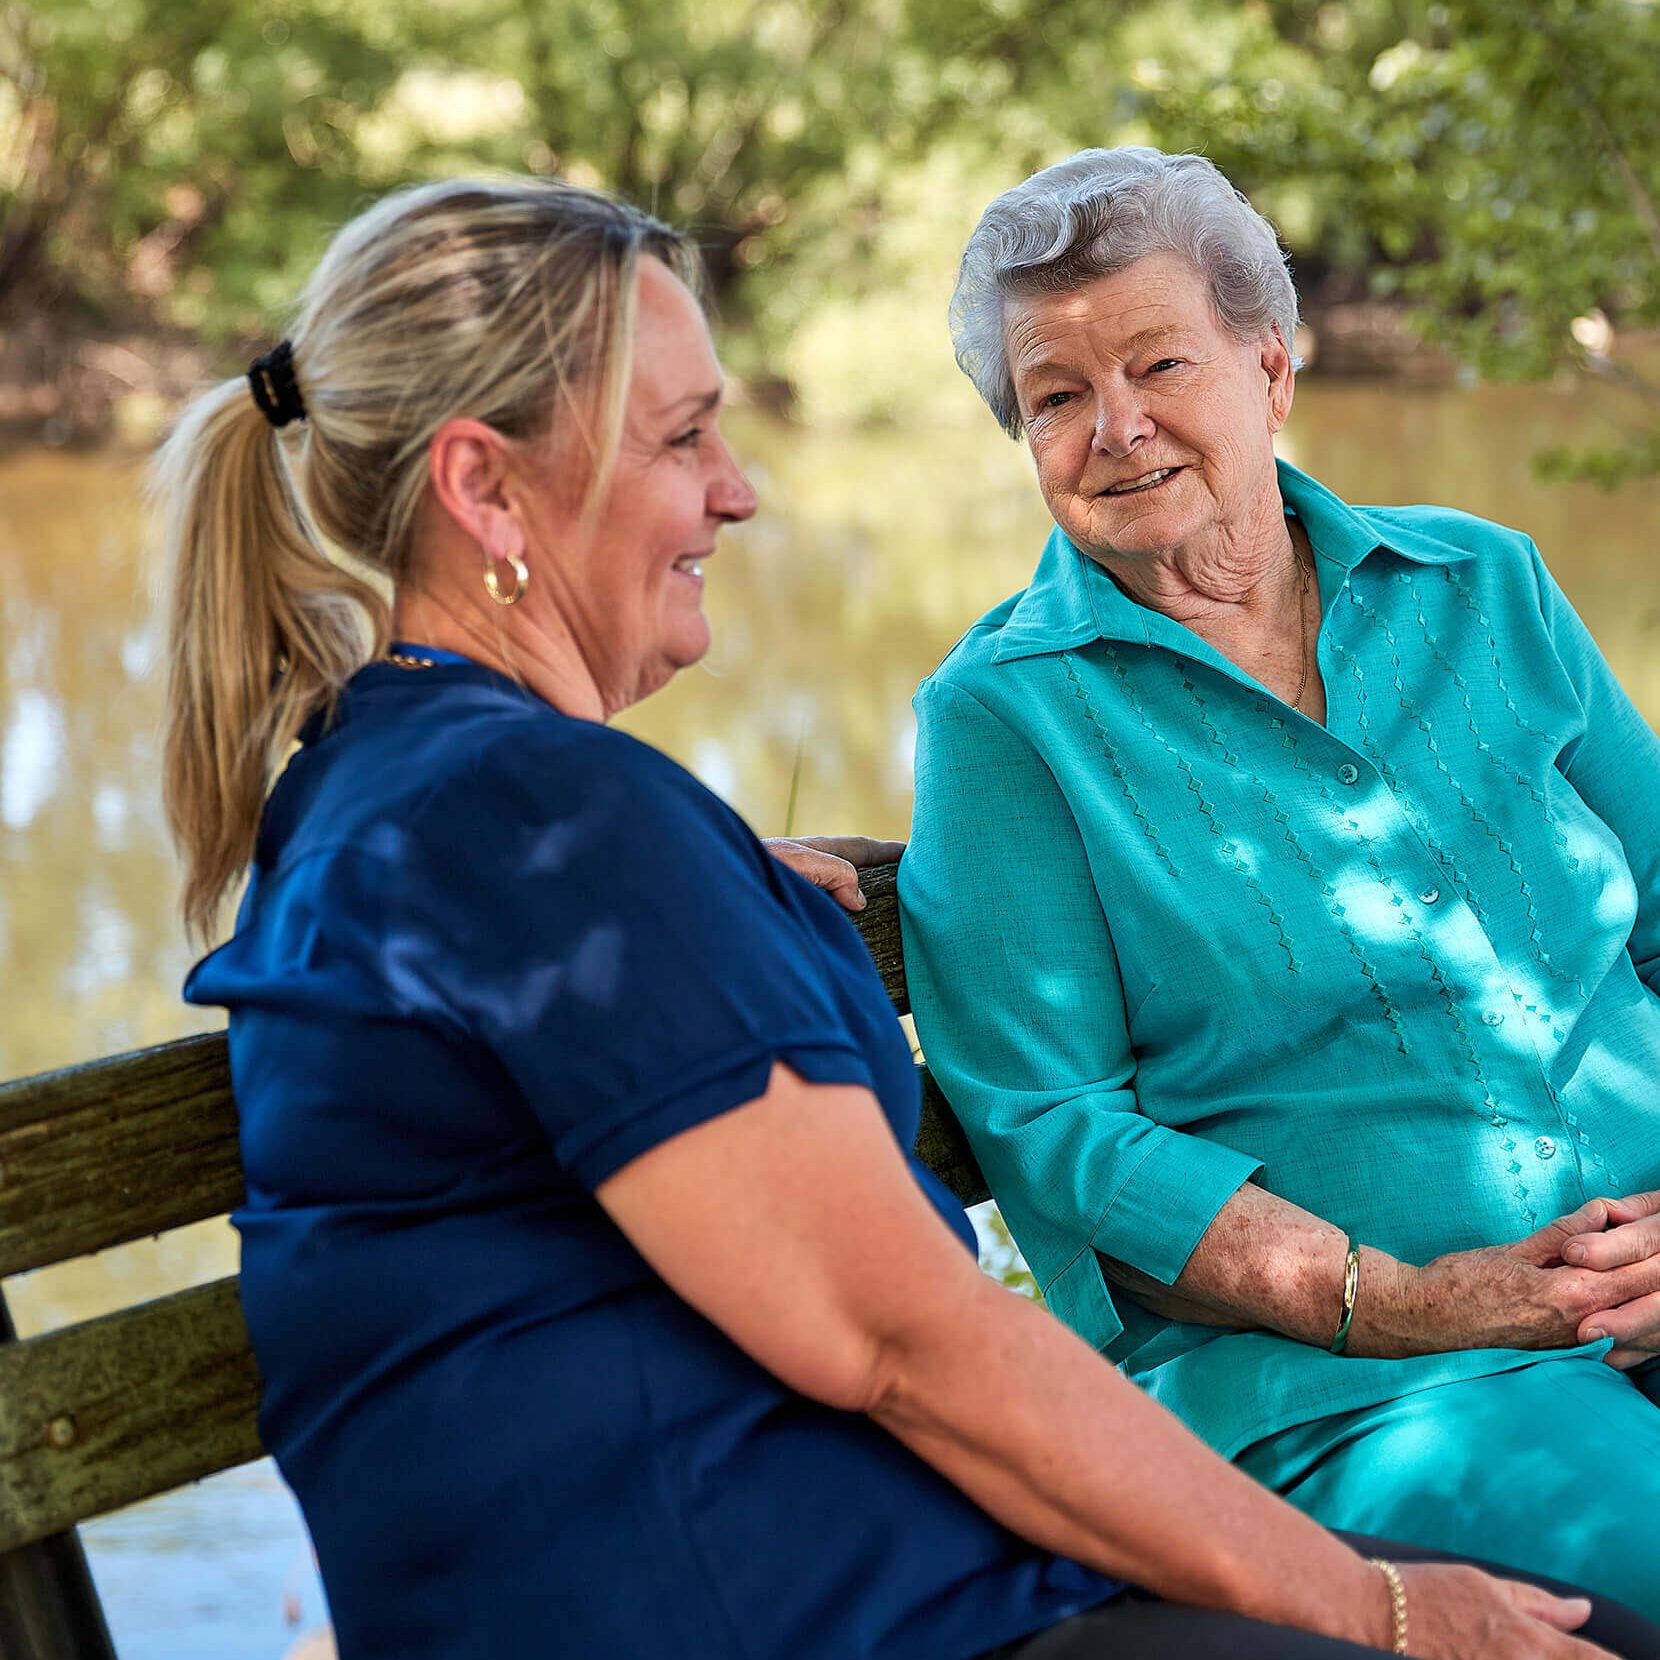 A blonde woman sitting on a park bench smiling in a blue Valmar uniform. An elderly woman in a green pant suit is sitting next to her with her hands crossed in her lap looking happy.